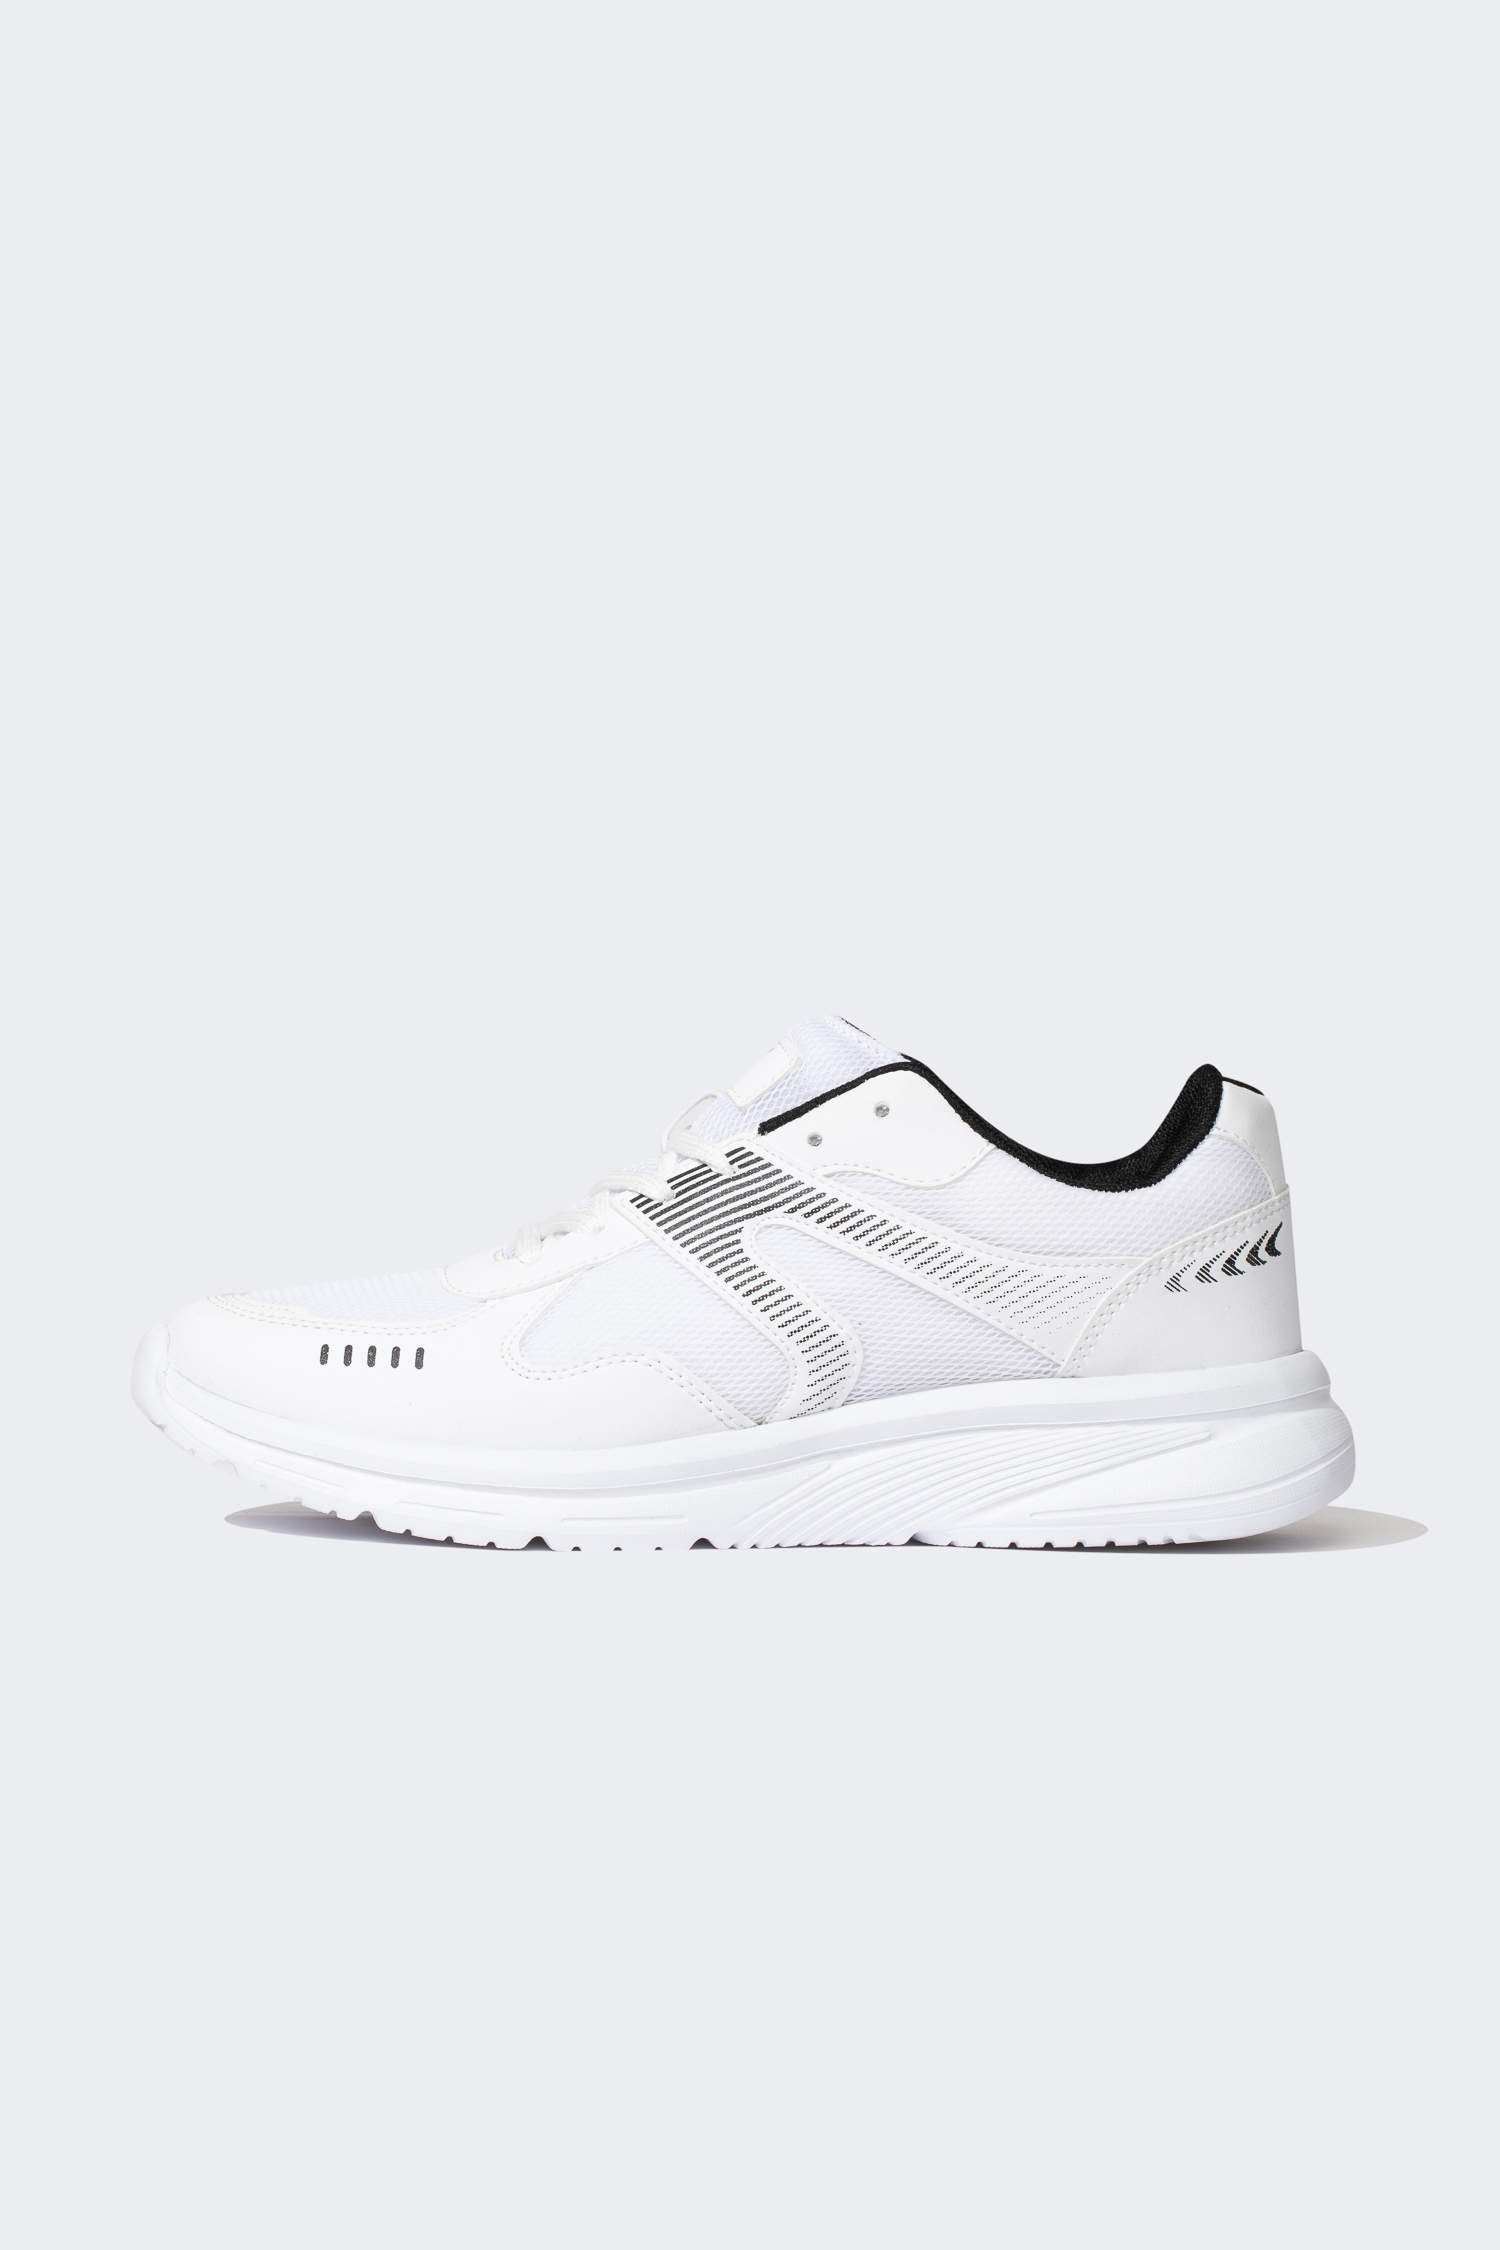 Adidas Sport Shoes With White With Red Color And Lace Closup, Tpr Insole  Materials at Best Price in Madurai | Sree Sports